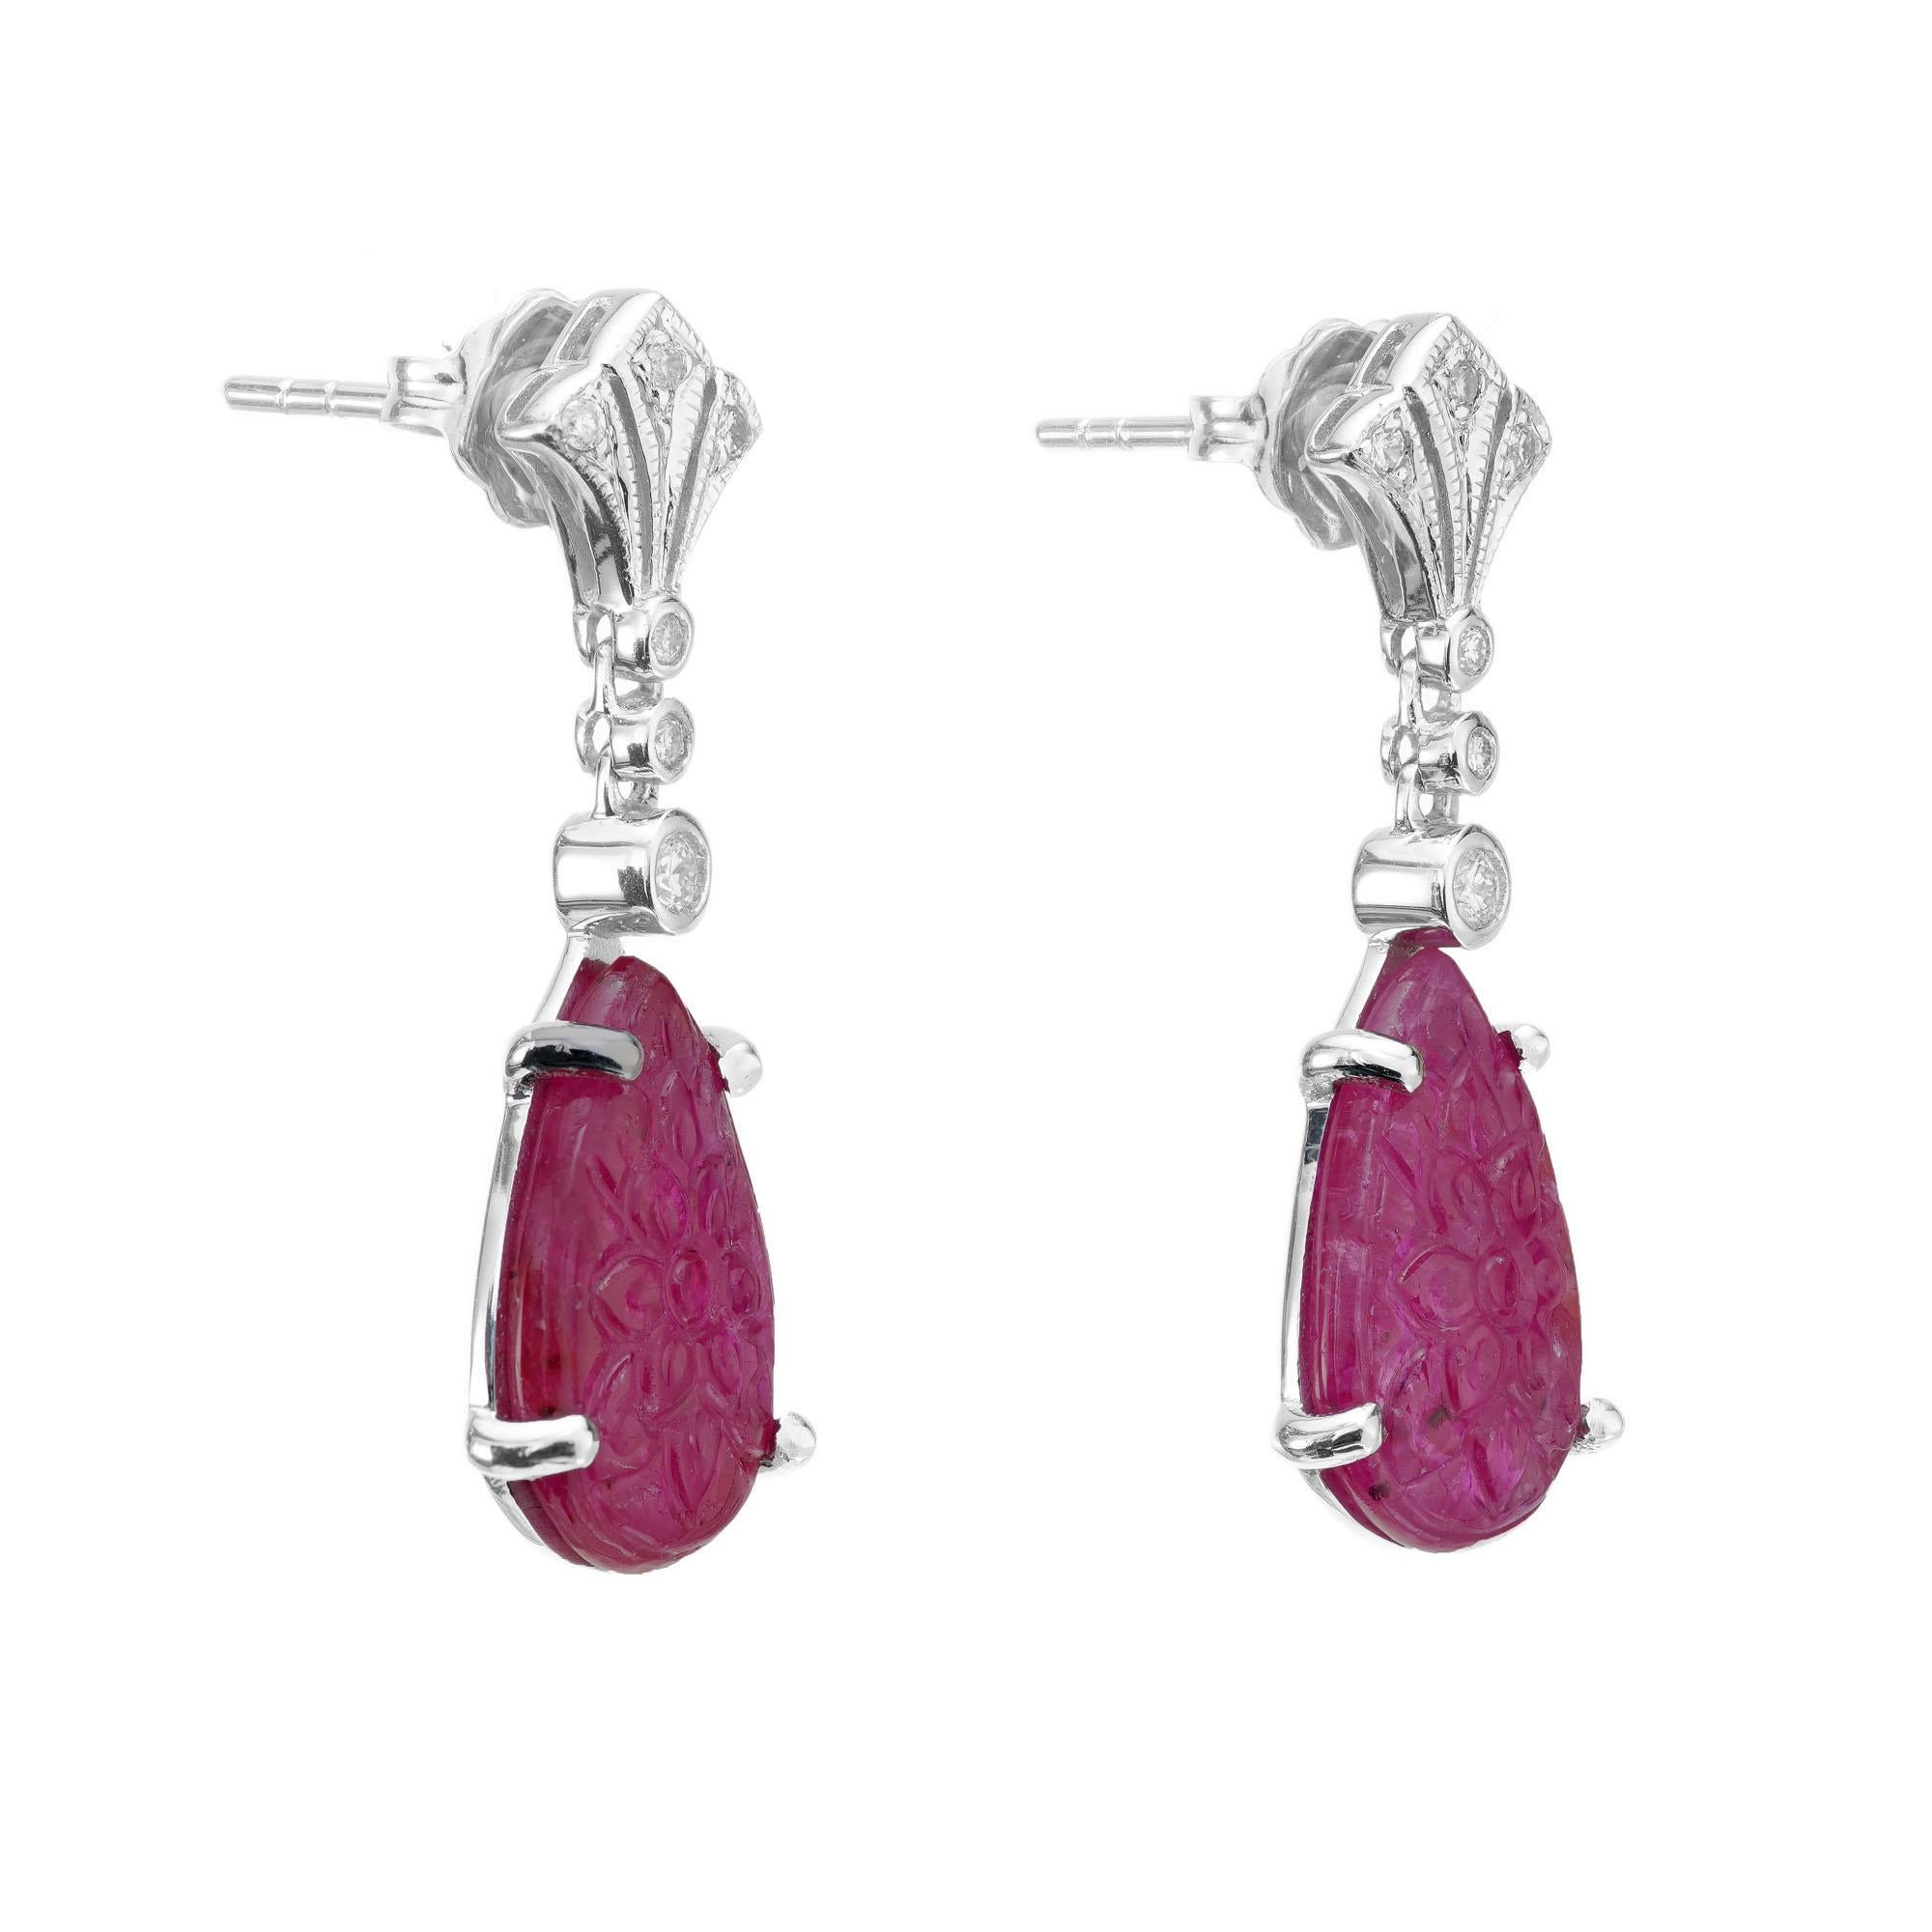 1940's Carved translucent Ruby and diamond dangle earrings. Two pear shaped rubies with 12 round cut accent diamonds in 18k white gold settings. 

2 carved pear Rubies, 13.42 x 7.43mm
2 round diamonds, approx. total weight .04cts, H, SI1
10 round